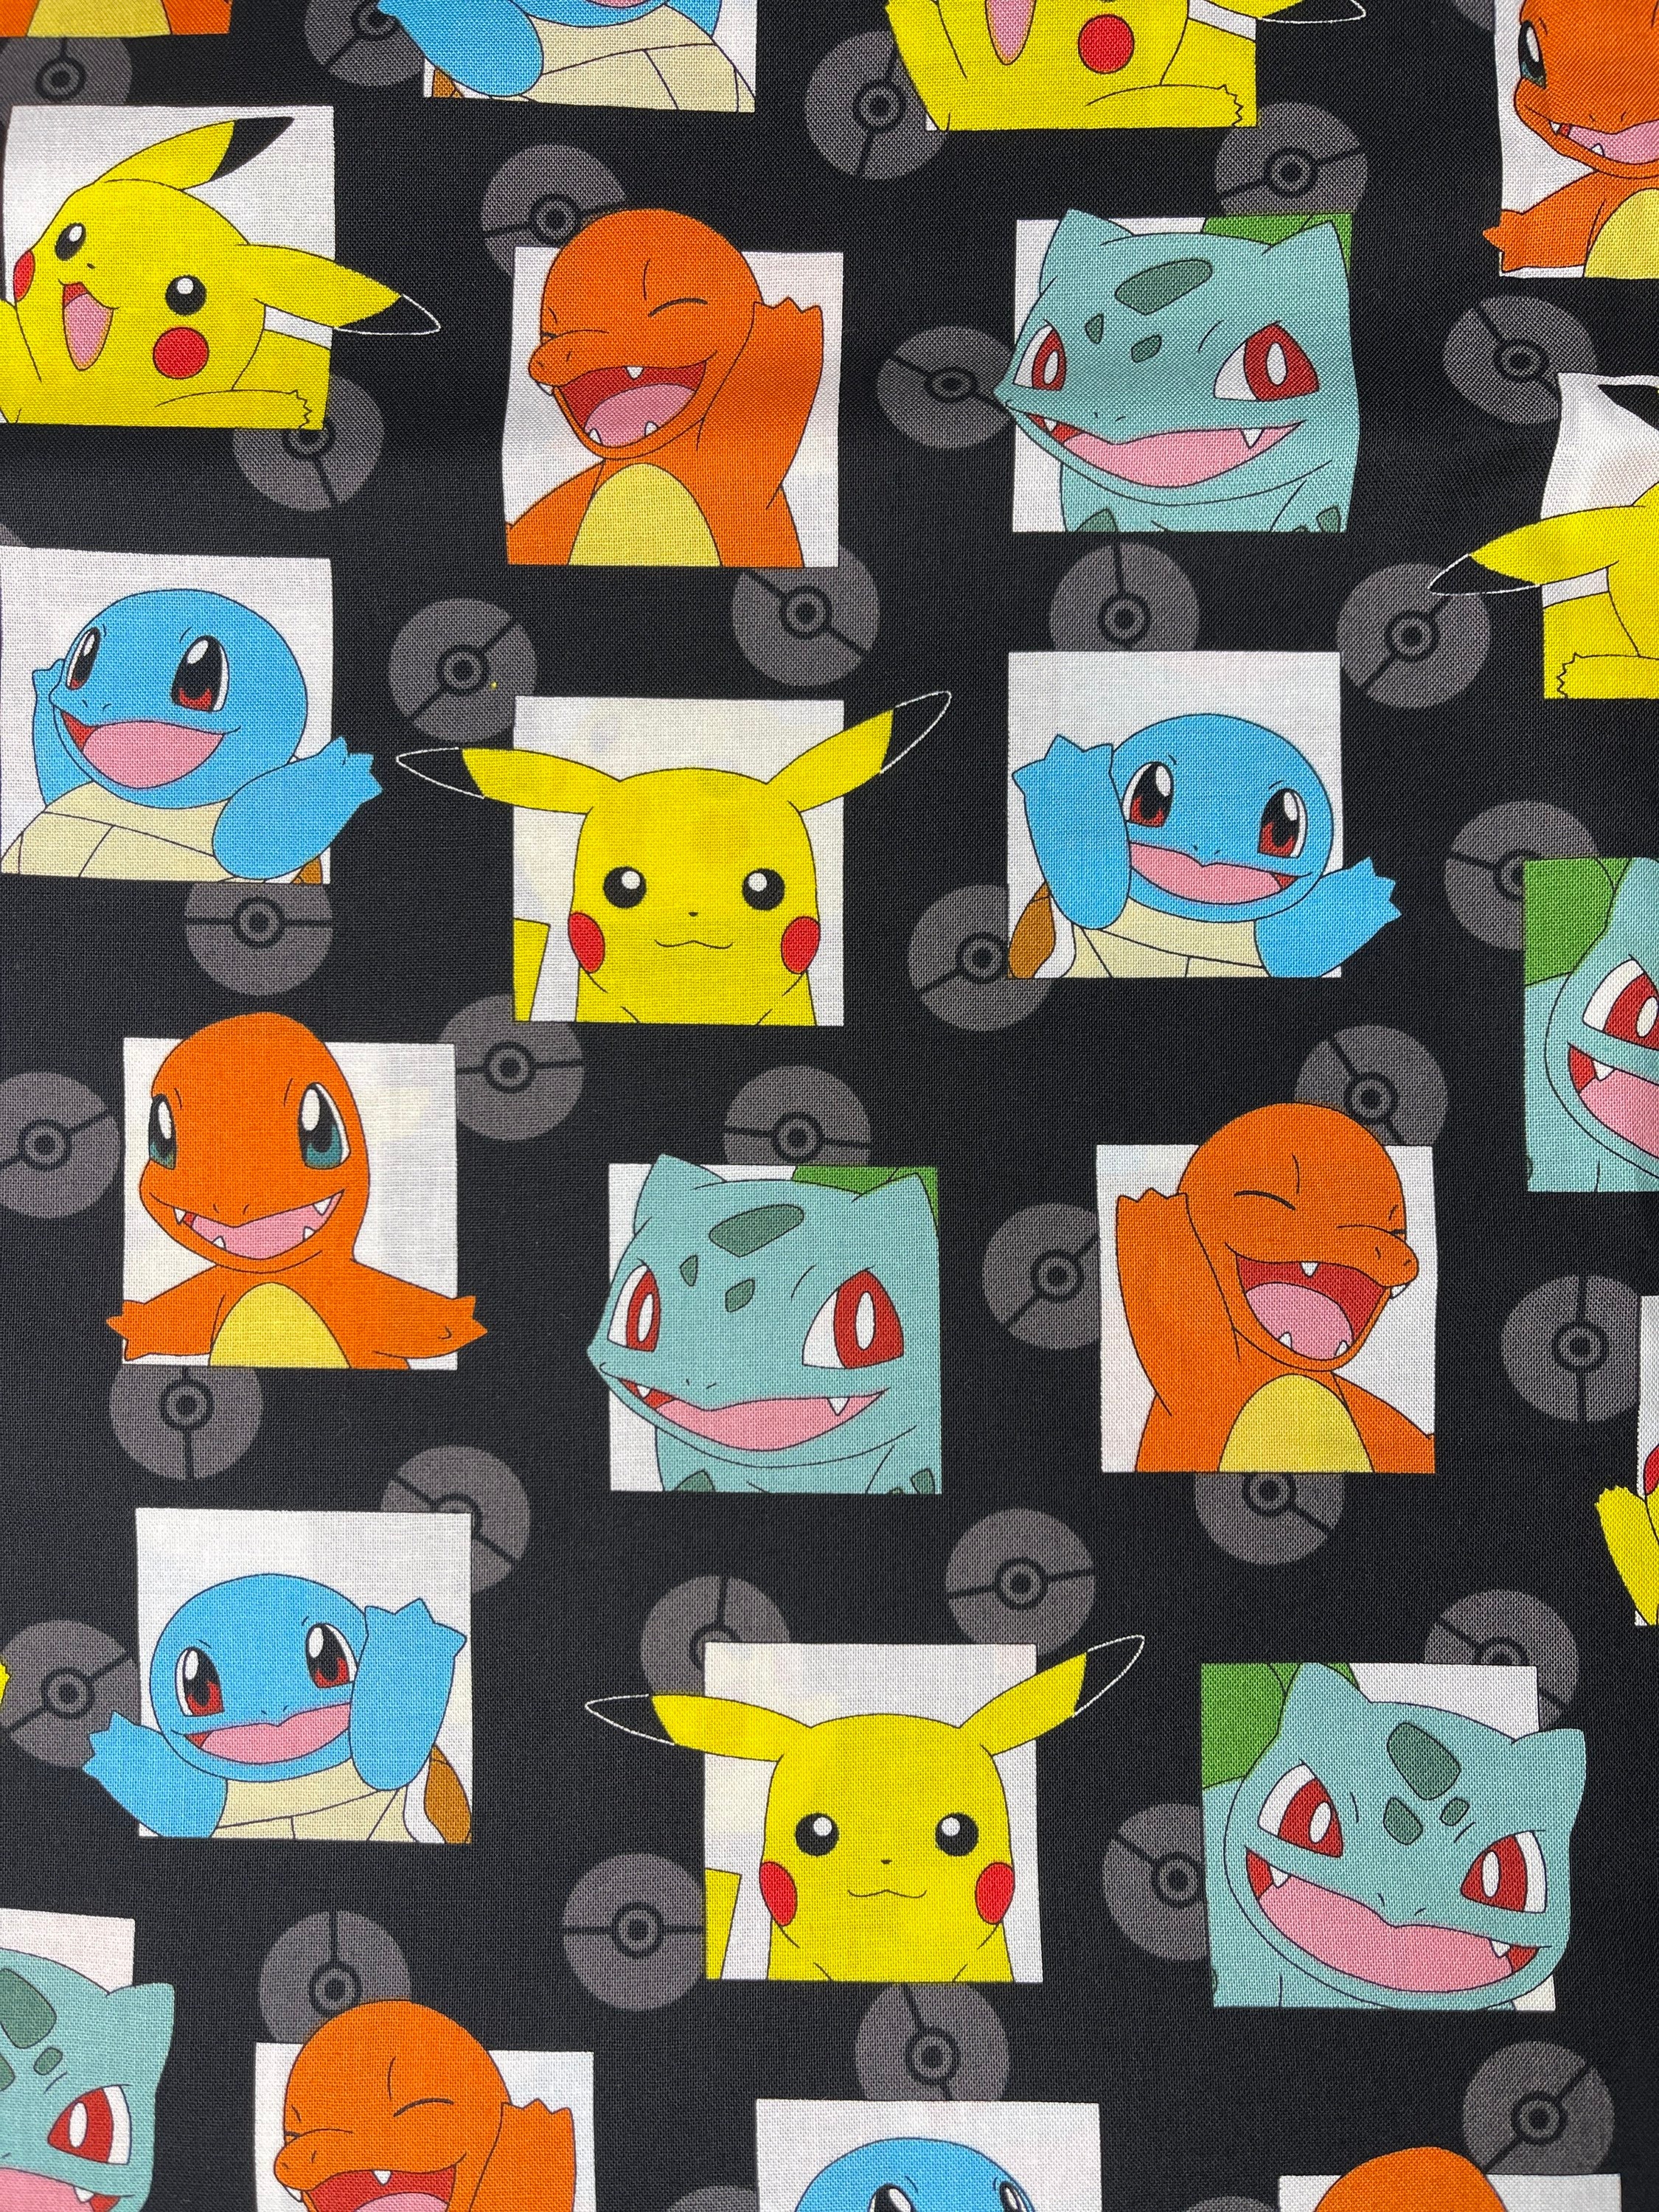 In Stock 6 X 4 Pokemon and Friends Pikachu Bulbasaur Togepi Fabric Embroidered  Iron on Patch Charmander Squirtle Clefable Psyduck Poliwag 